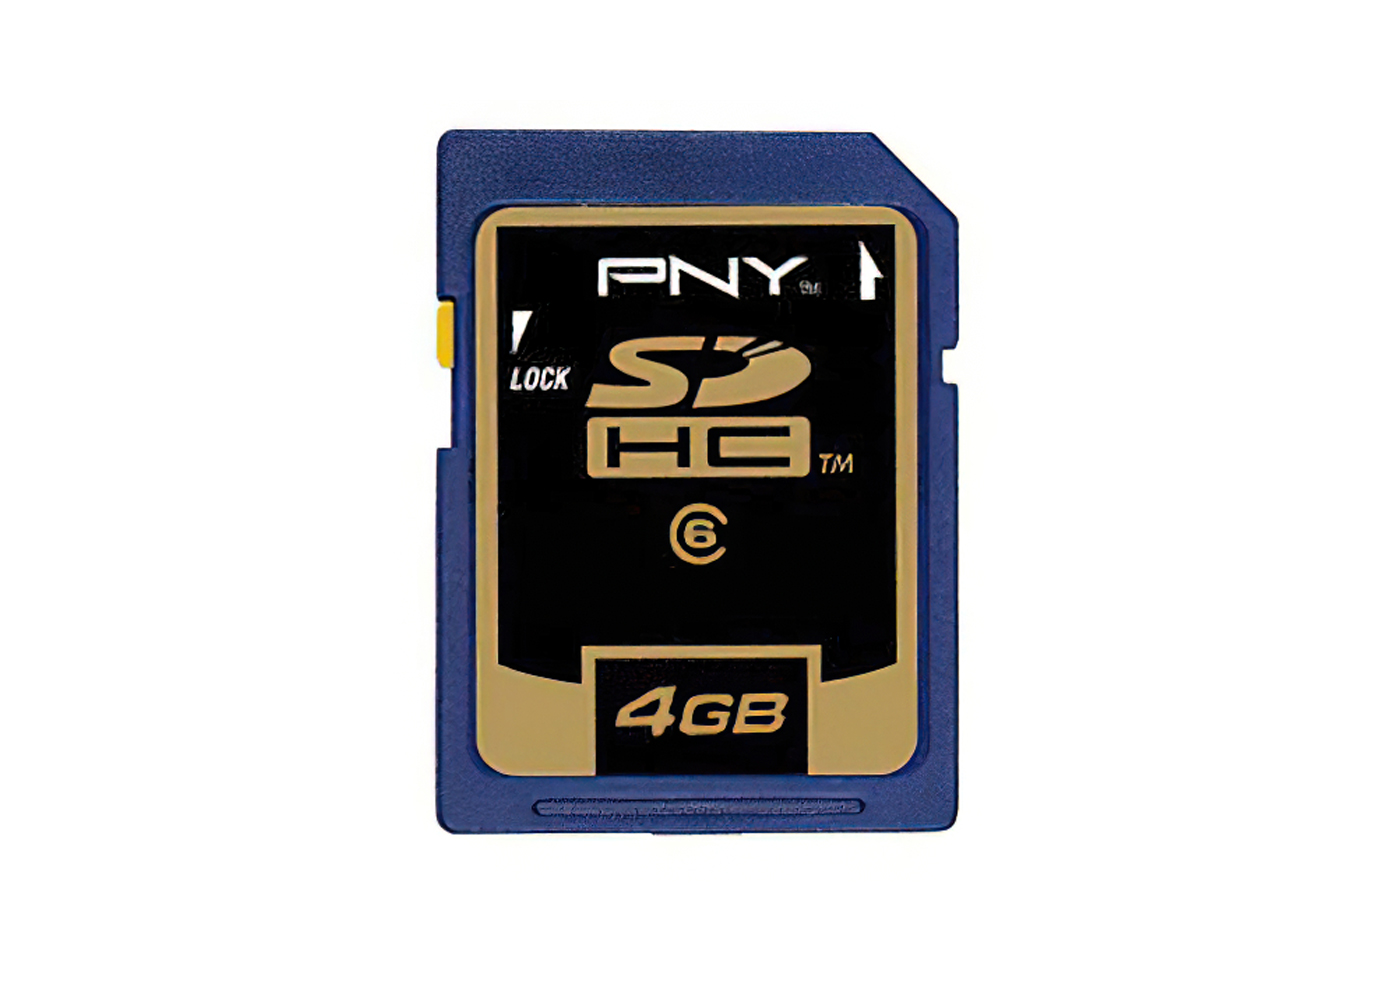 4 GB SD Card<br/>

<span class="clsSpnProdMdls">For all models with standard SD Card slot.</span>